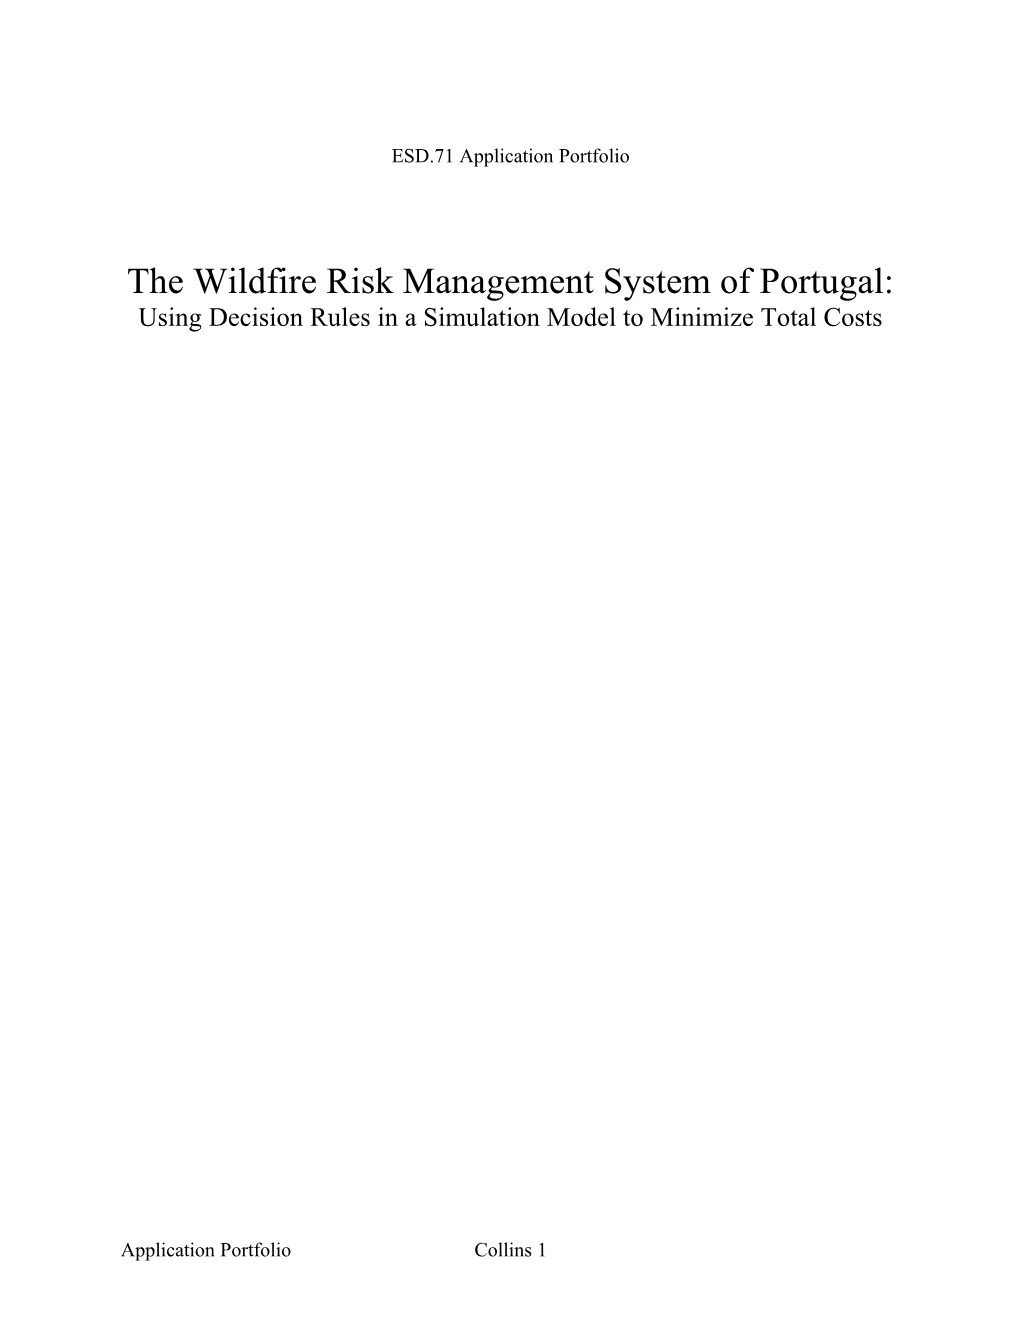 The Wildfire Risk Management System of Portugal